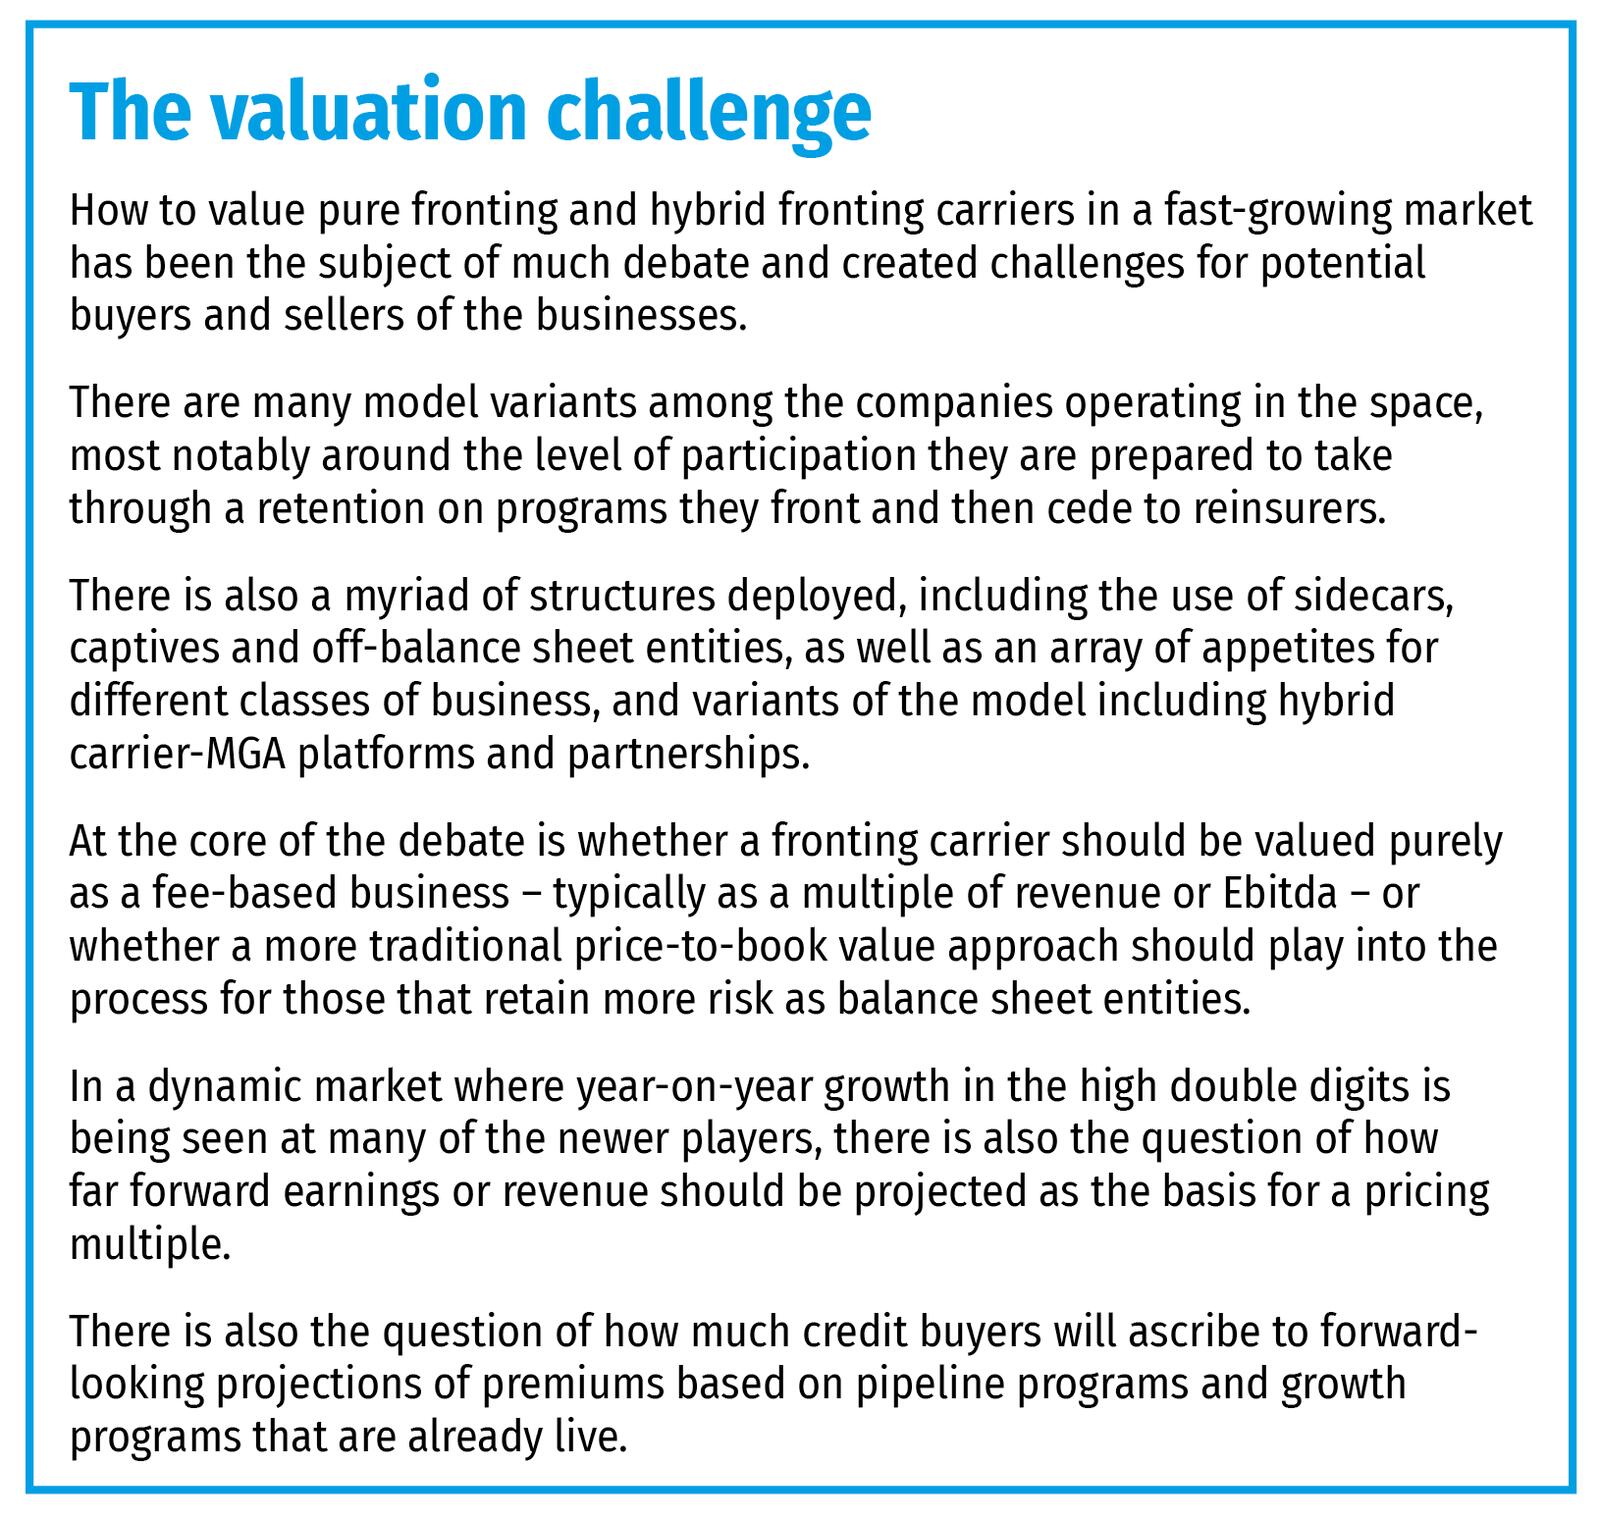 The valuation challenge